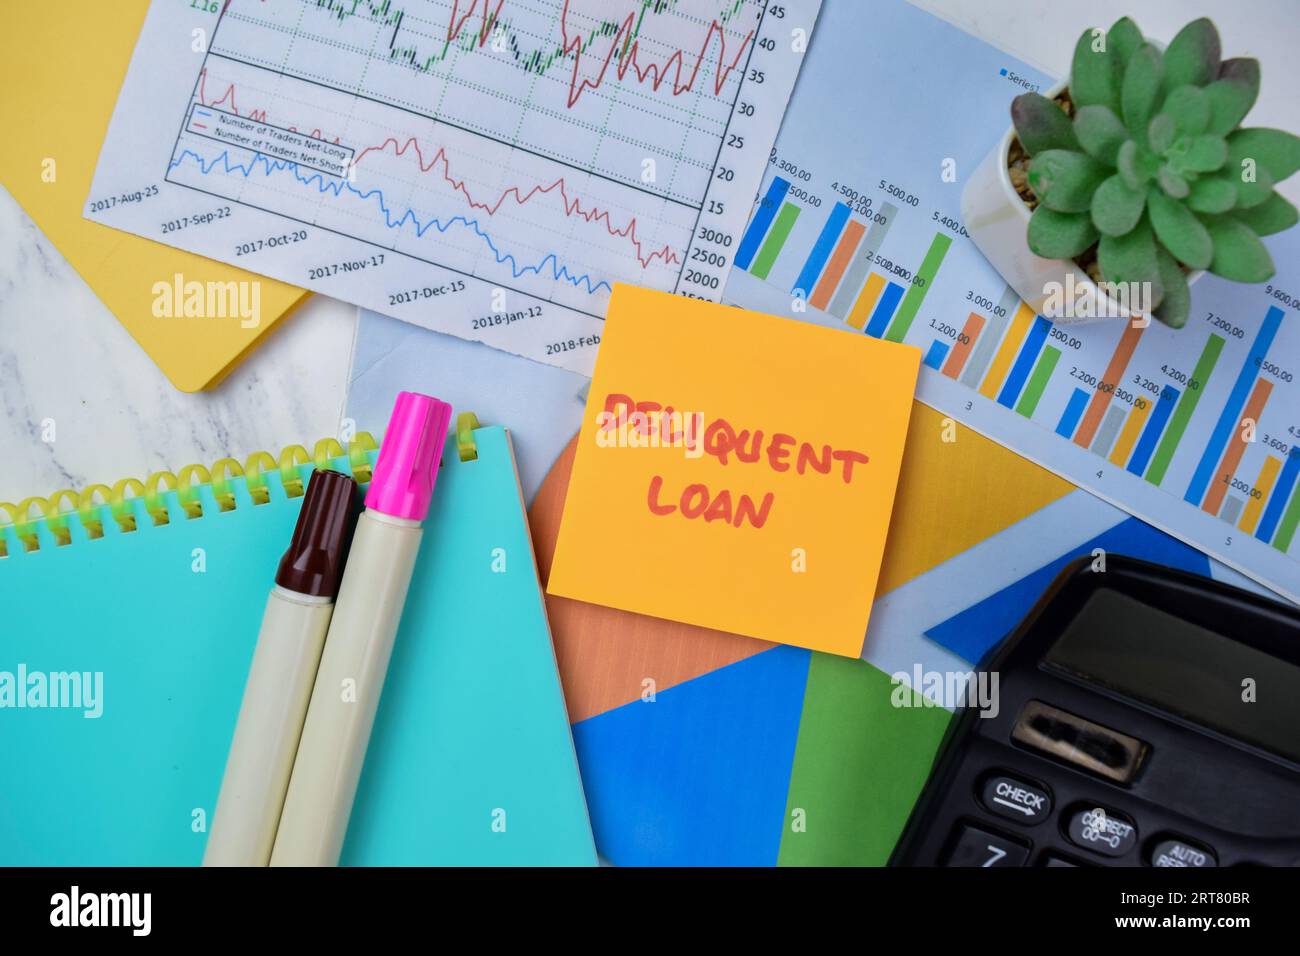 Concept of Deliquent Loan write on sticky notes isolated on Wooden Table. Stock Photo